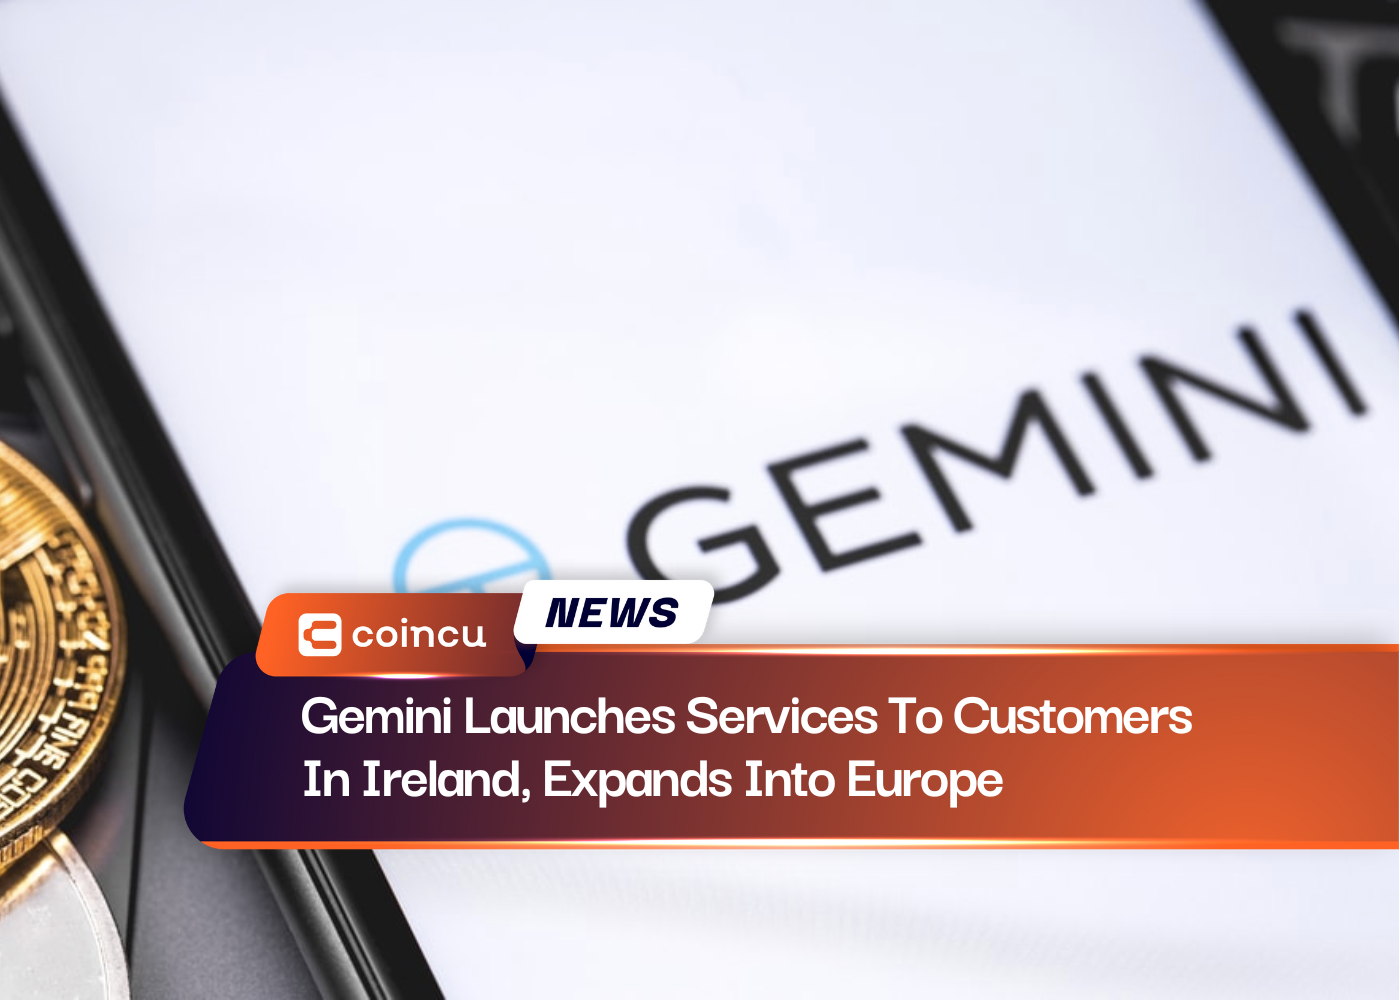 Gemini Launches Services To Customers In Ireland, Expands Into Europe